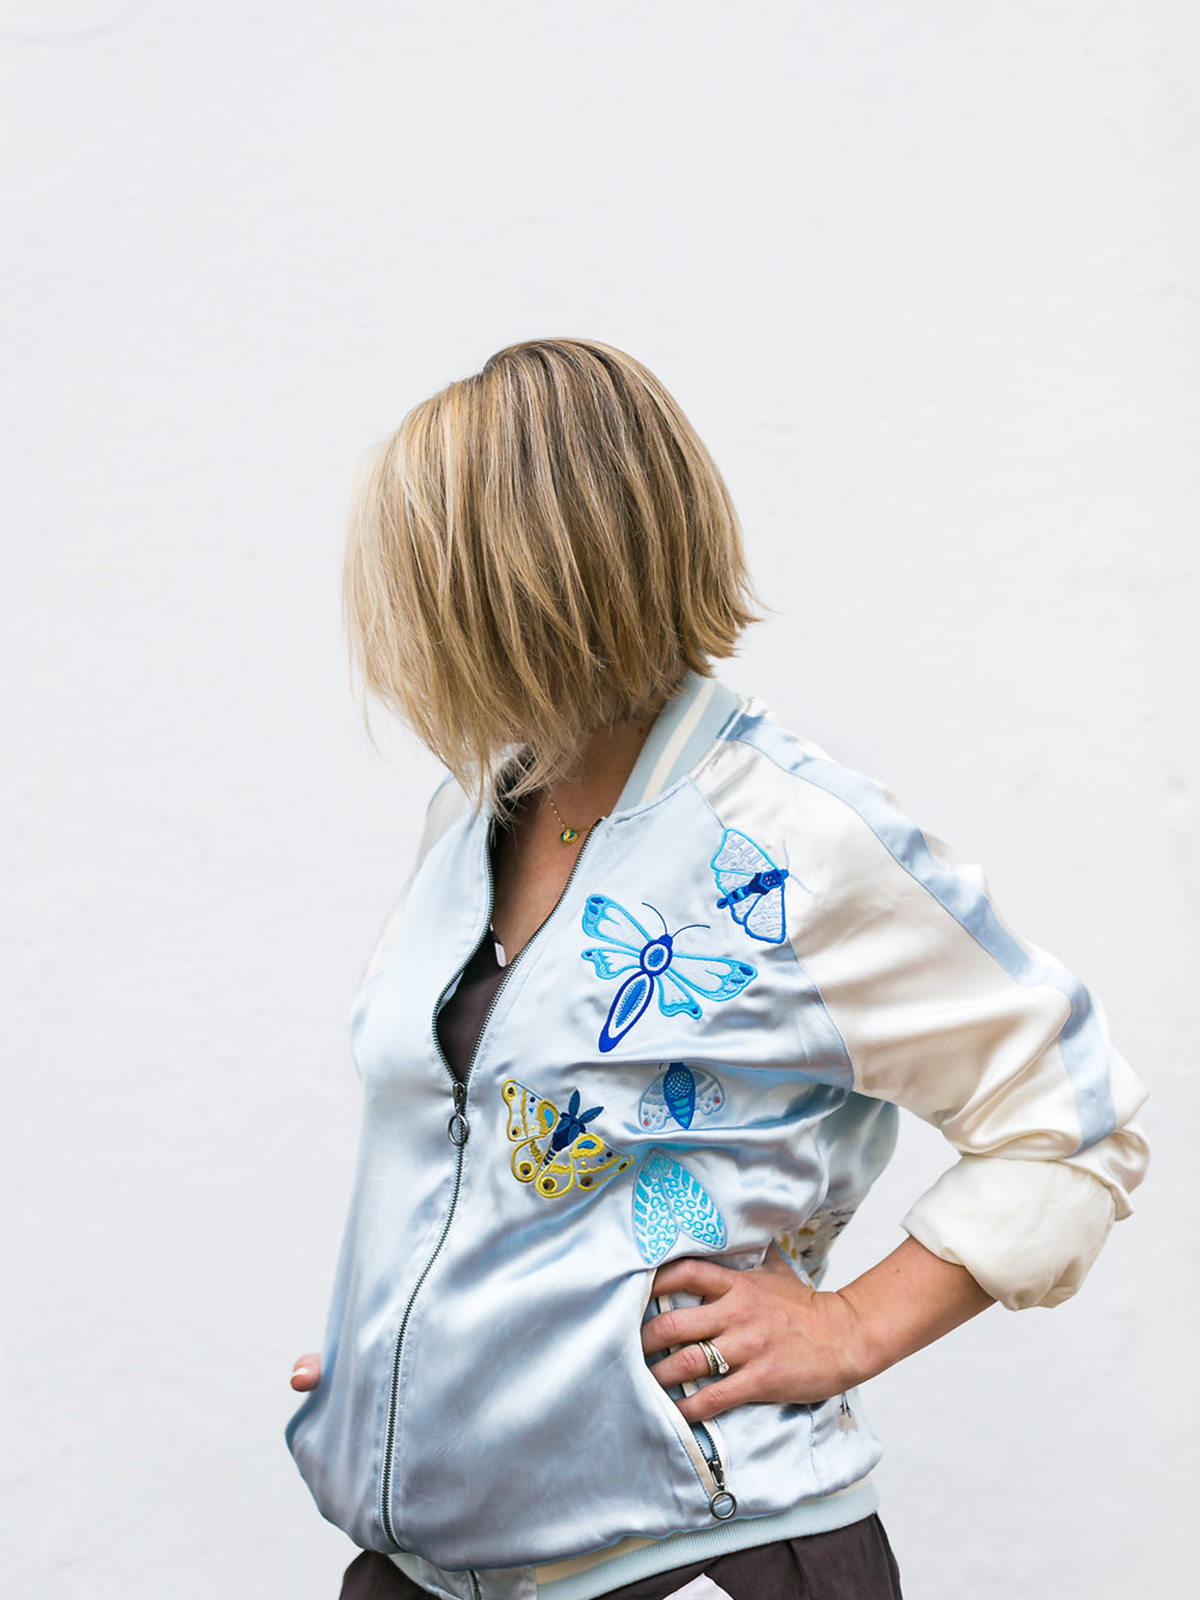 Embroidered Jacket with Alison Glass Exlibris Embroidery Designs